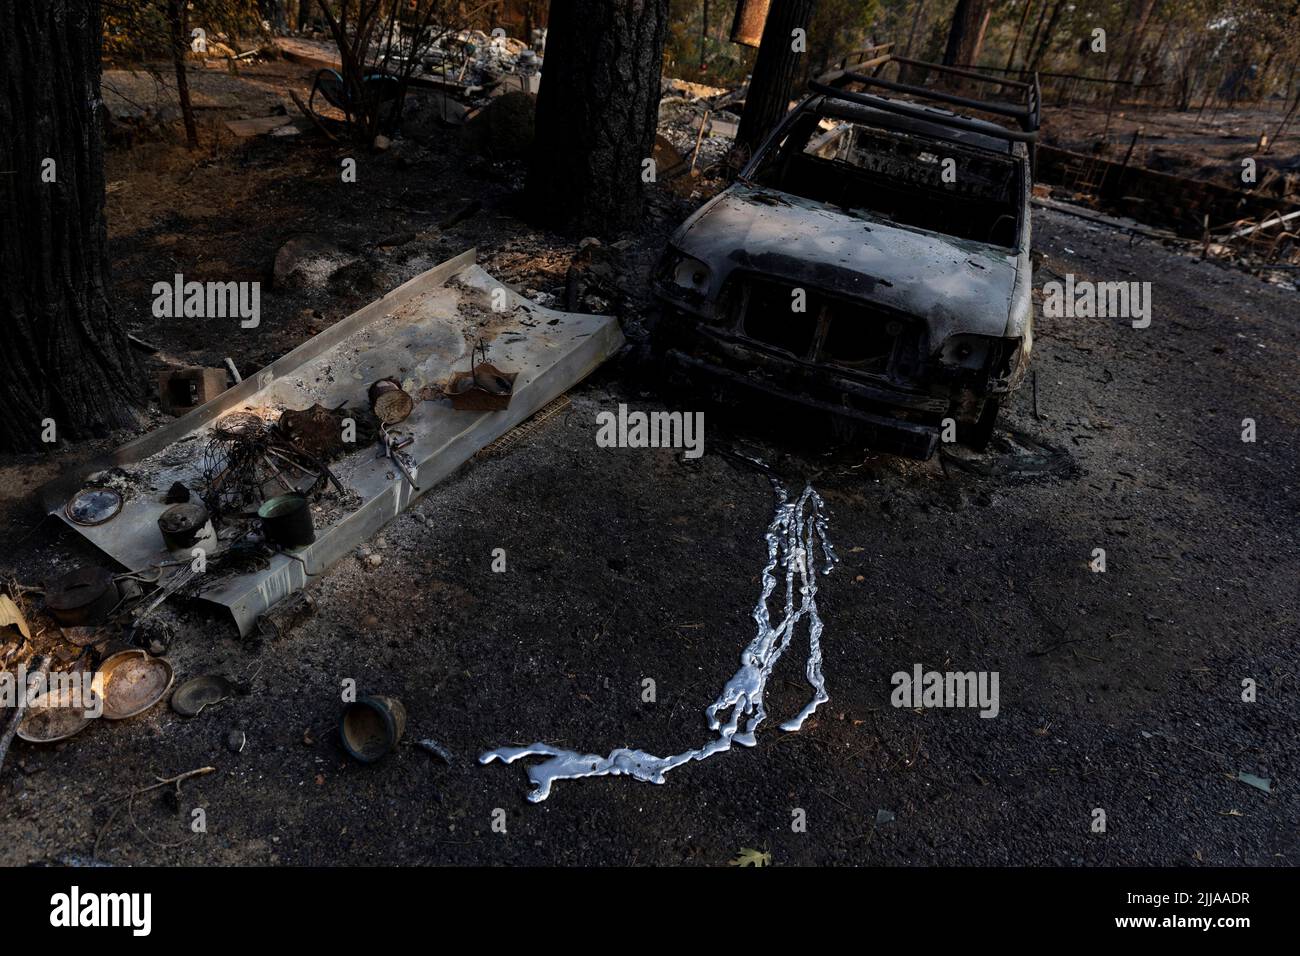 Melted metal from a burned vehicle is seen as the Oak Fire burns areas near Darrah in Mariposa County, California, U.S., July 24, 2022. REUTERS/Carlos Barria Stock Photo